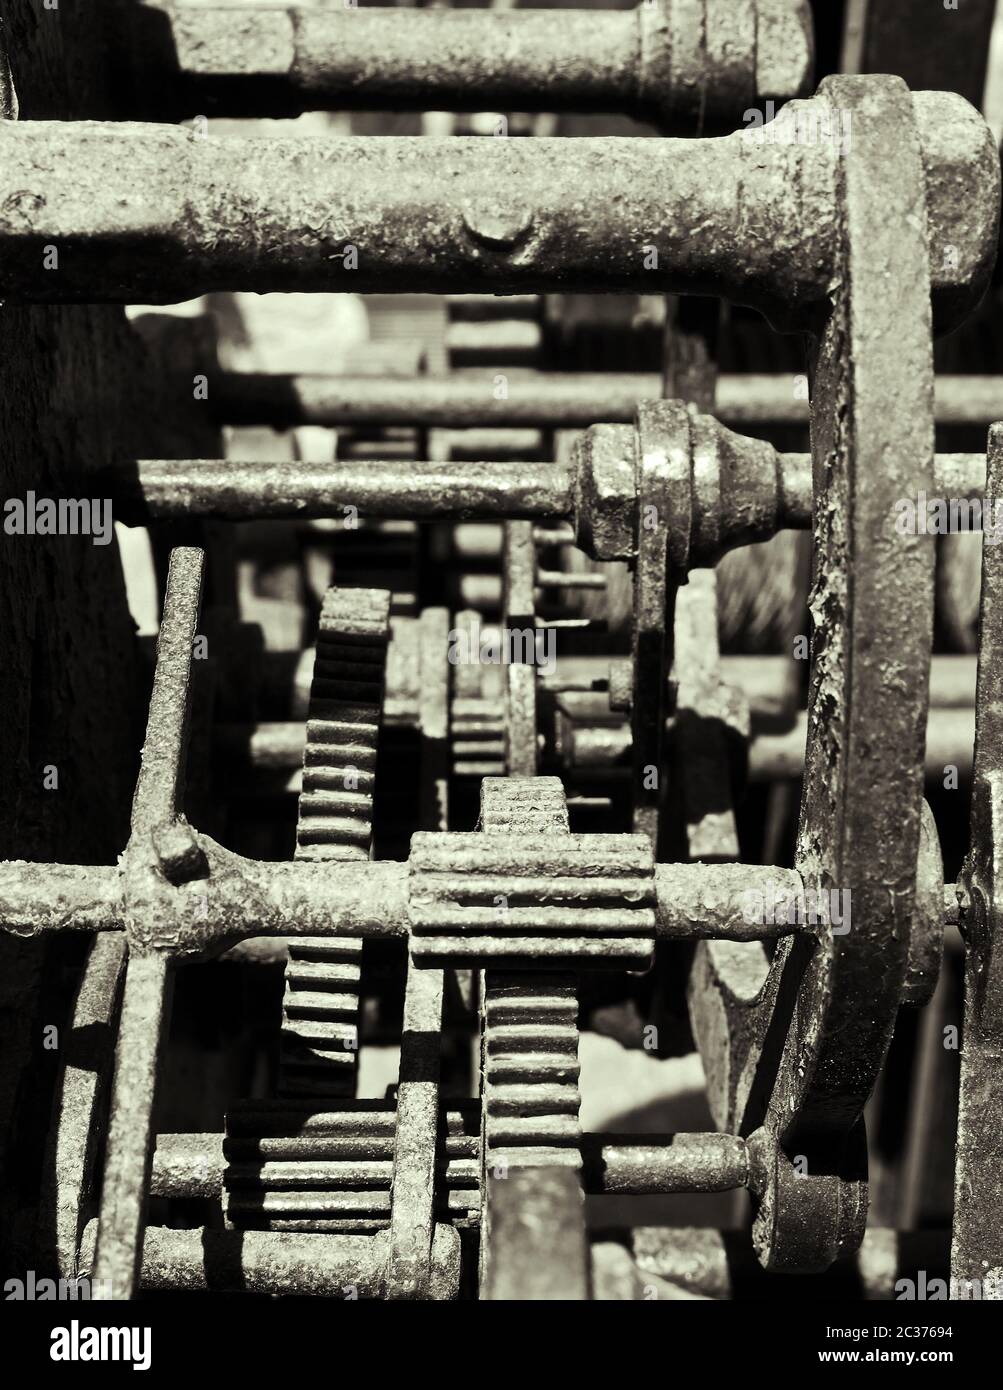 a monochrome close up of complex gears and cogwheels on old rusting steel machinery Stock Photo